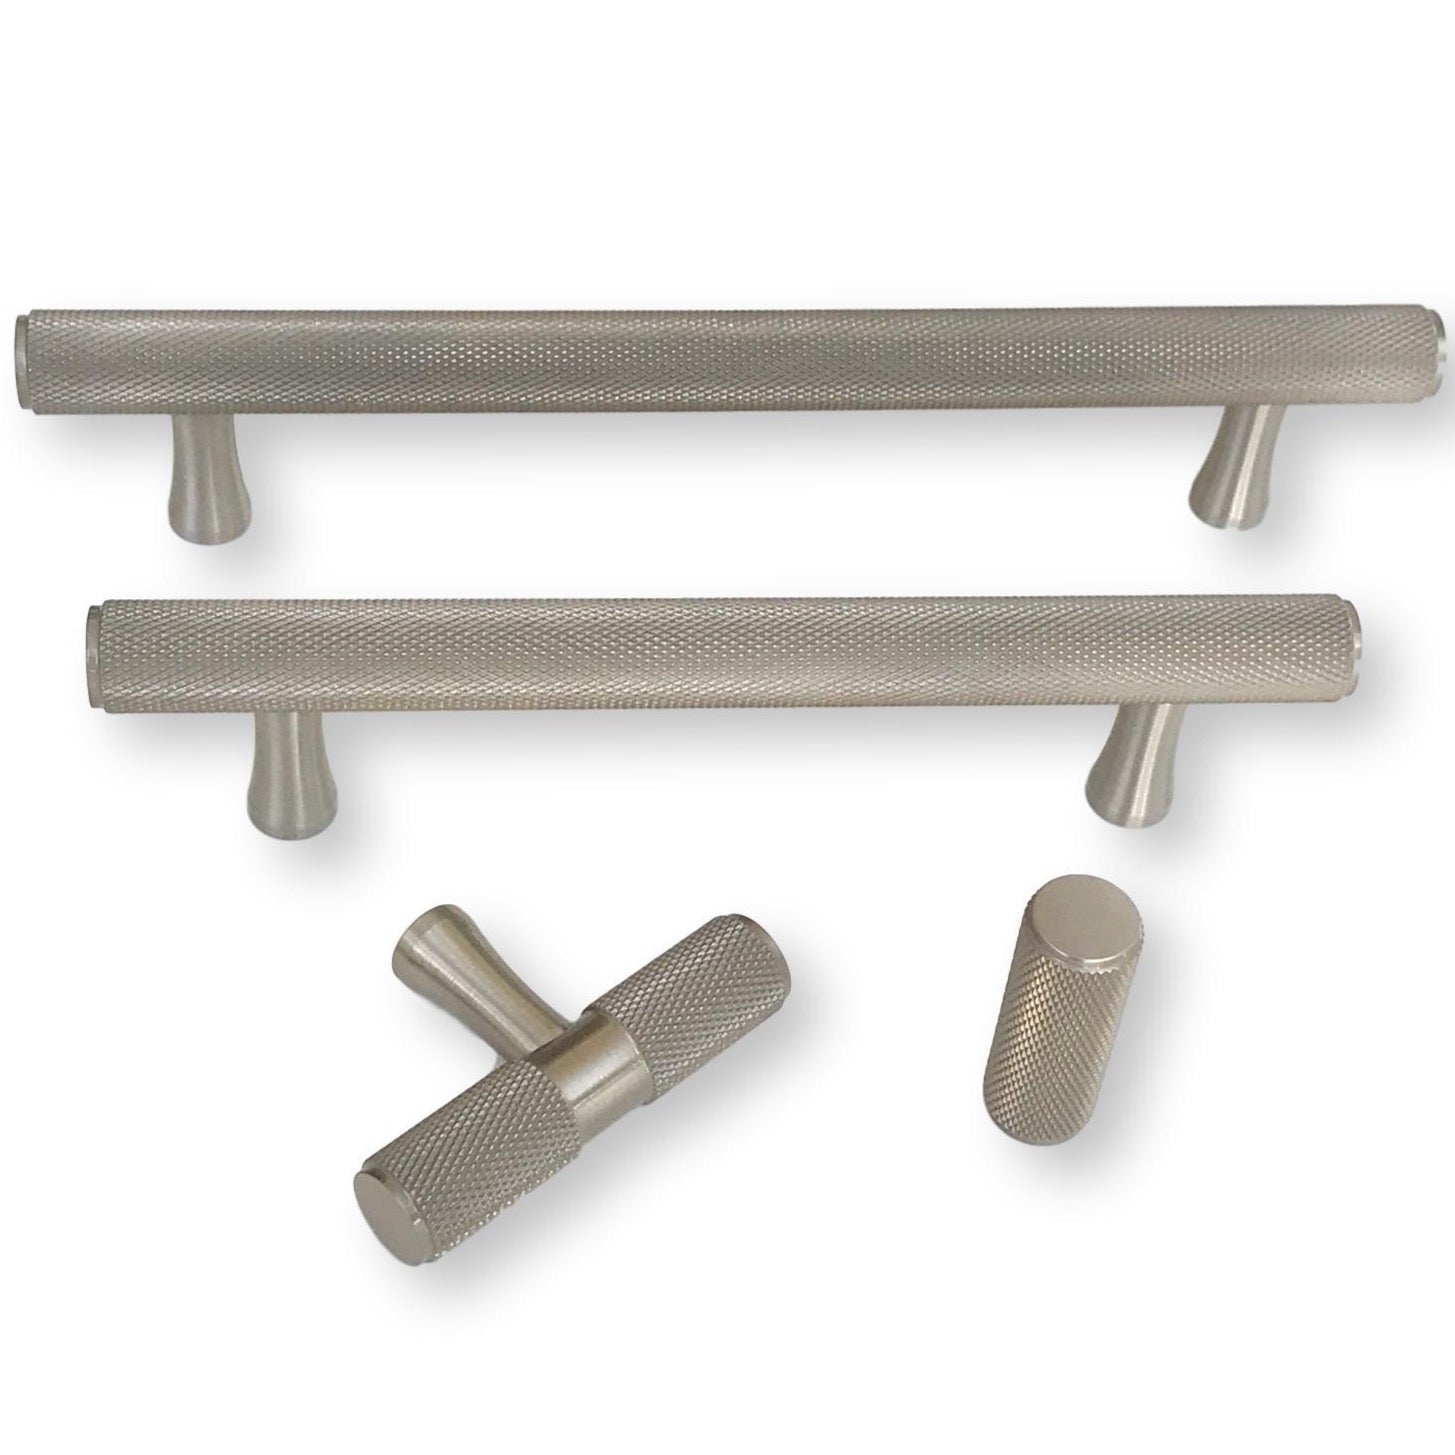 Brushed Nickel Solid Texture Knurled Drawer Pulls and Knobs